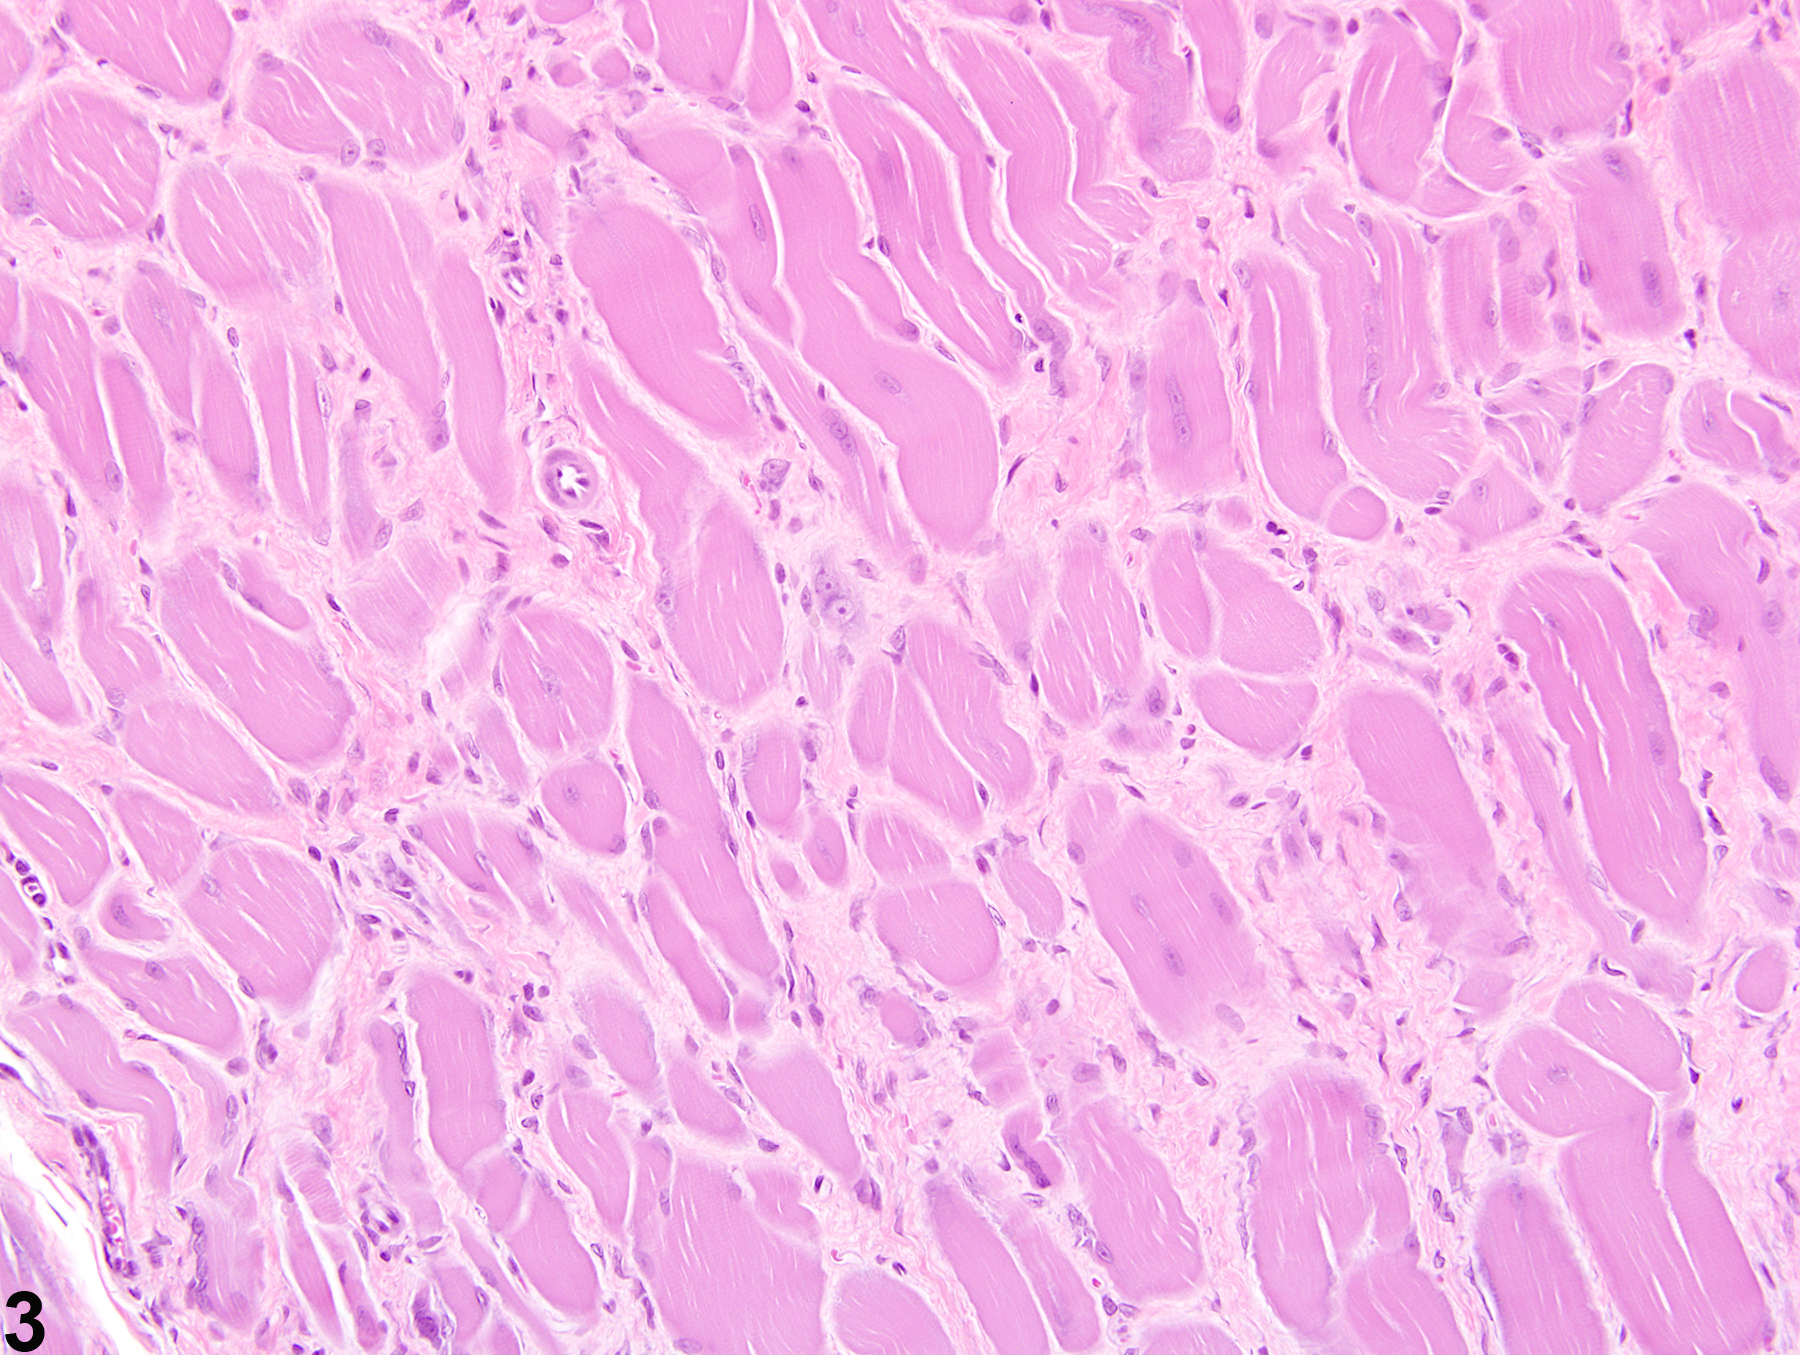 Image of fibrosis in the skeletal muscle from a male Harlan Sprague-Dawley rat in a subchronic study